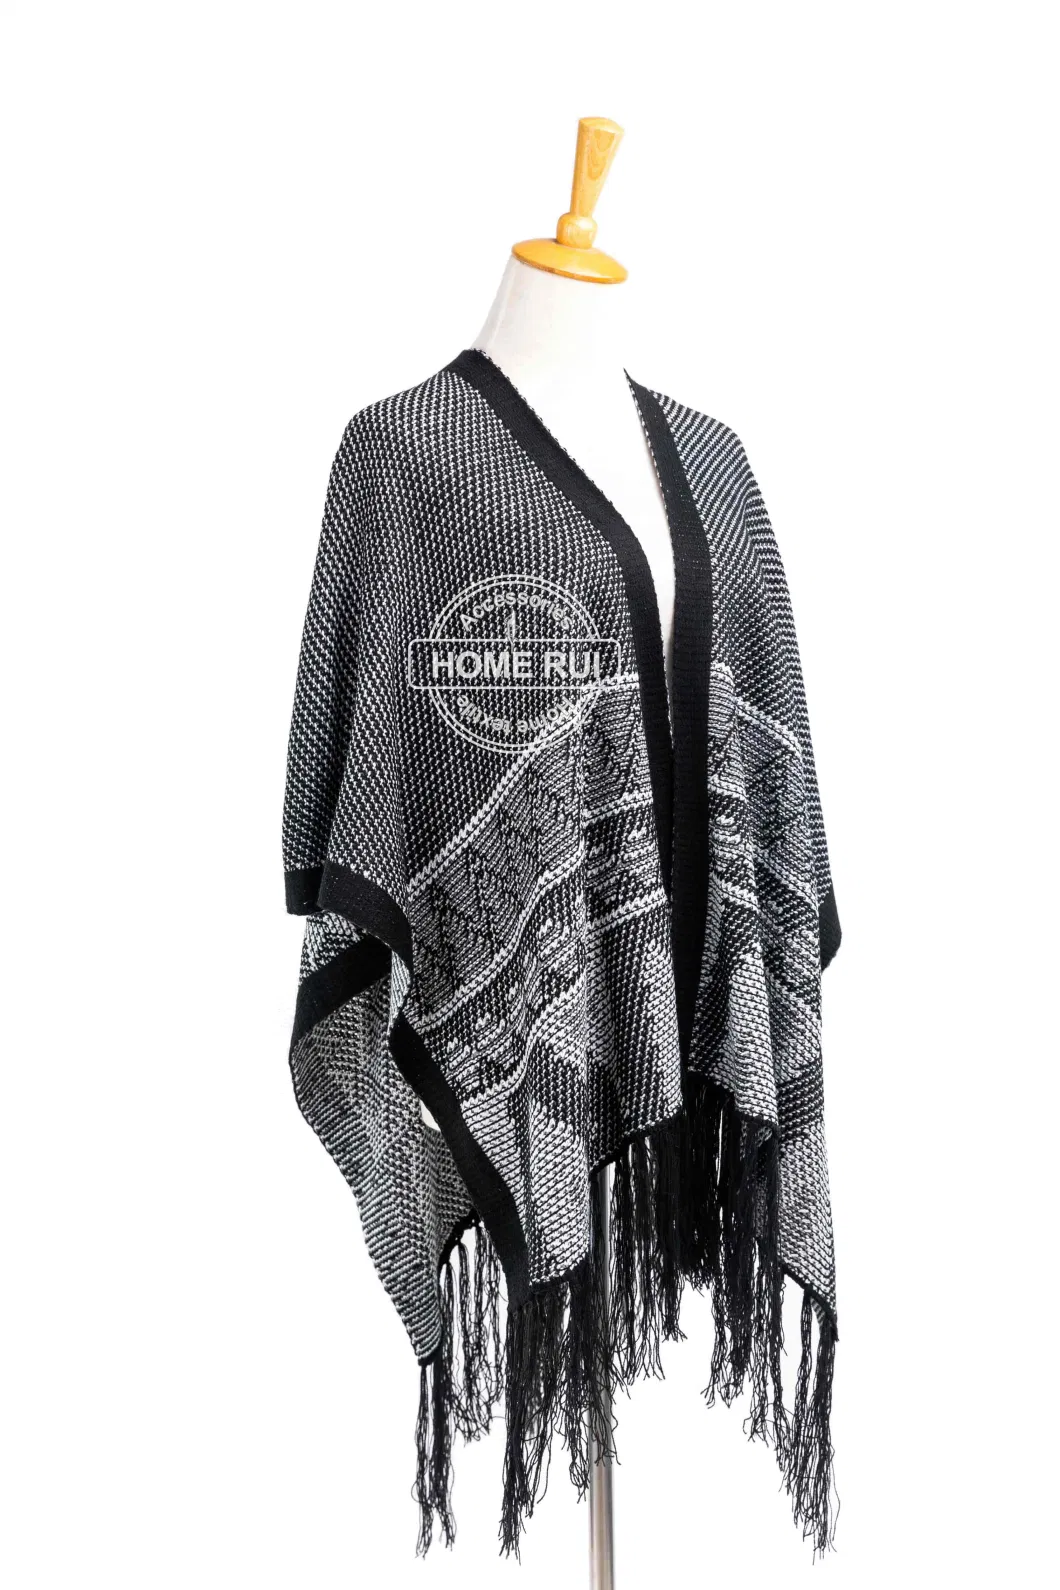 Home Rui Manufacturer Outerwear Spring Autumn Woman Warmth Reversible Rhombus Apparel Accessory Fringe Oversize Aztec Thick Cardigan Shawl Cape Cloak